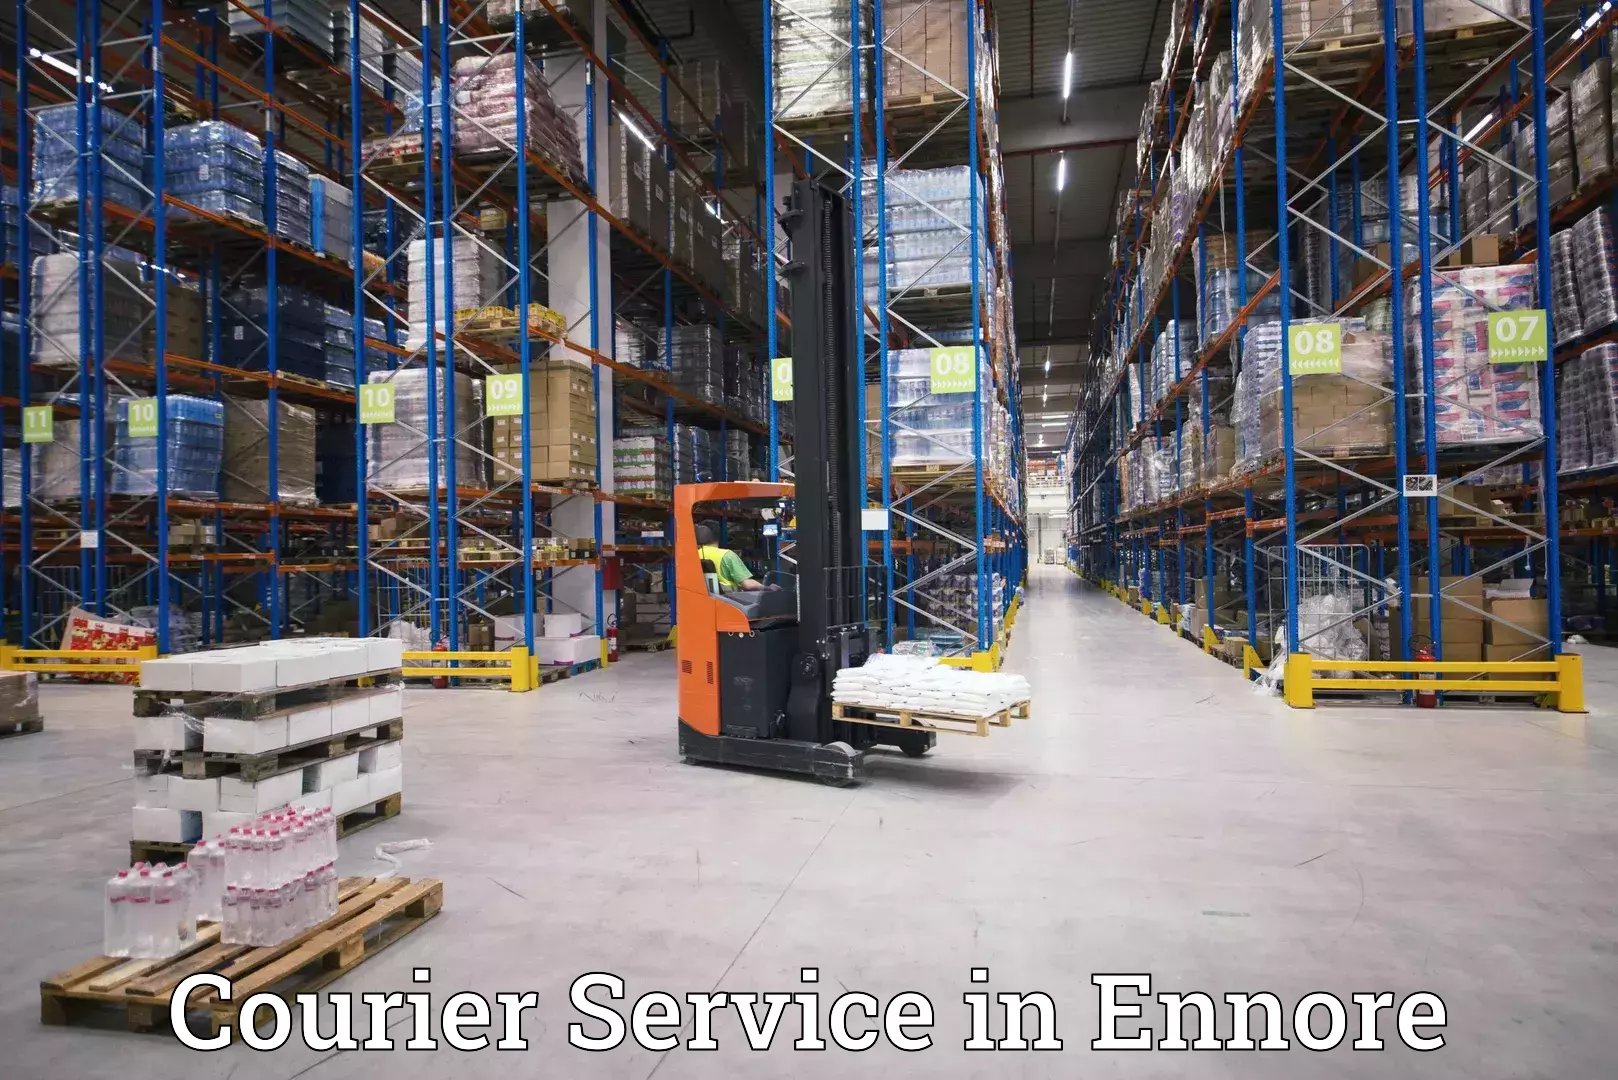 Reliable courier services in Ennore